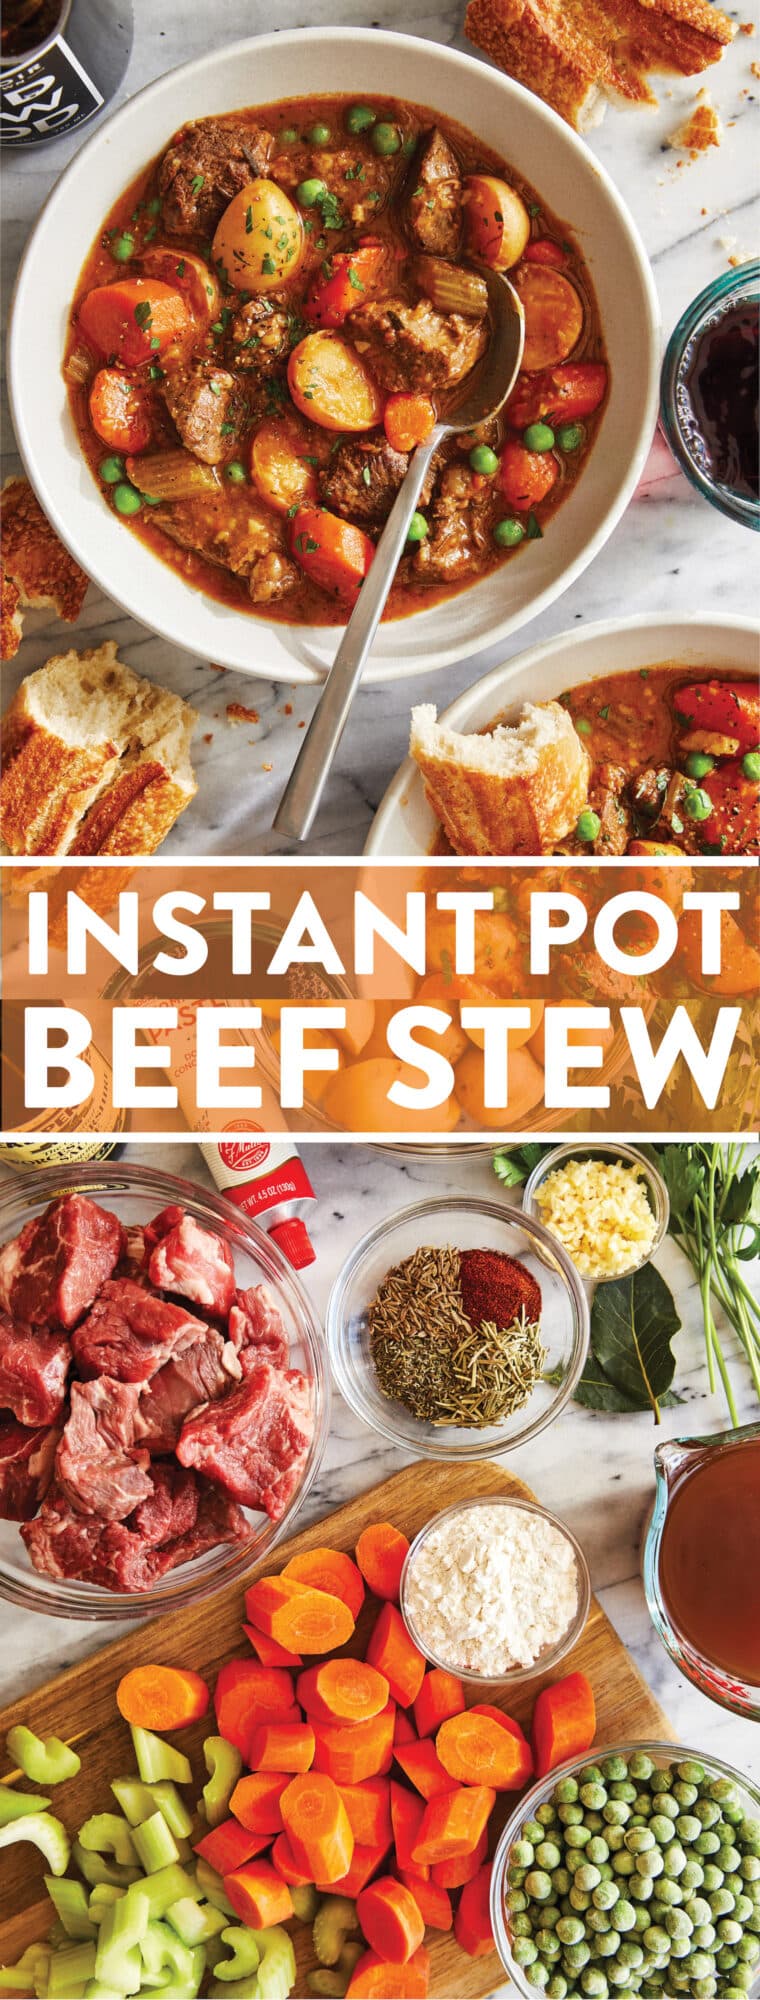 Instant Pot Beef Stew - Loaded with flavorful chunks of meat + potatoes that come out amazingly tender. Truly the BEST beef stew recipe ever!